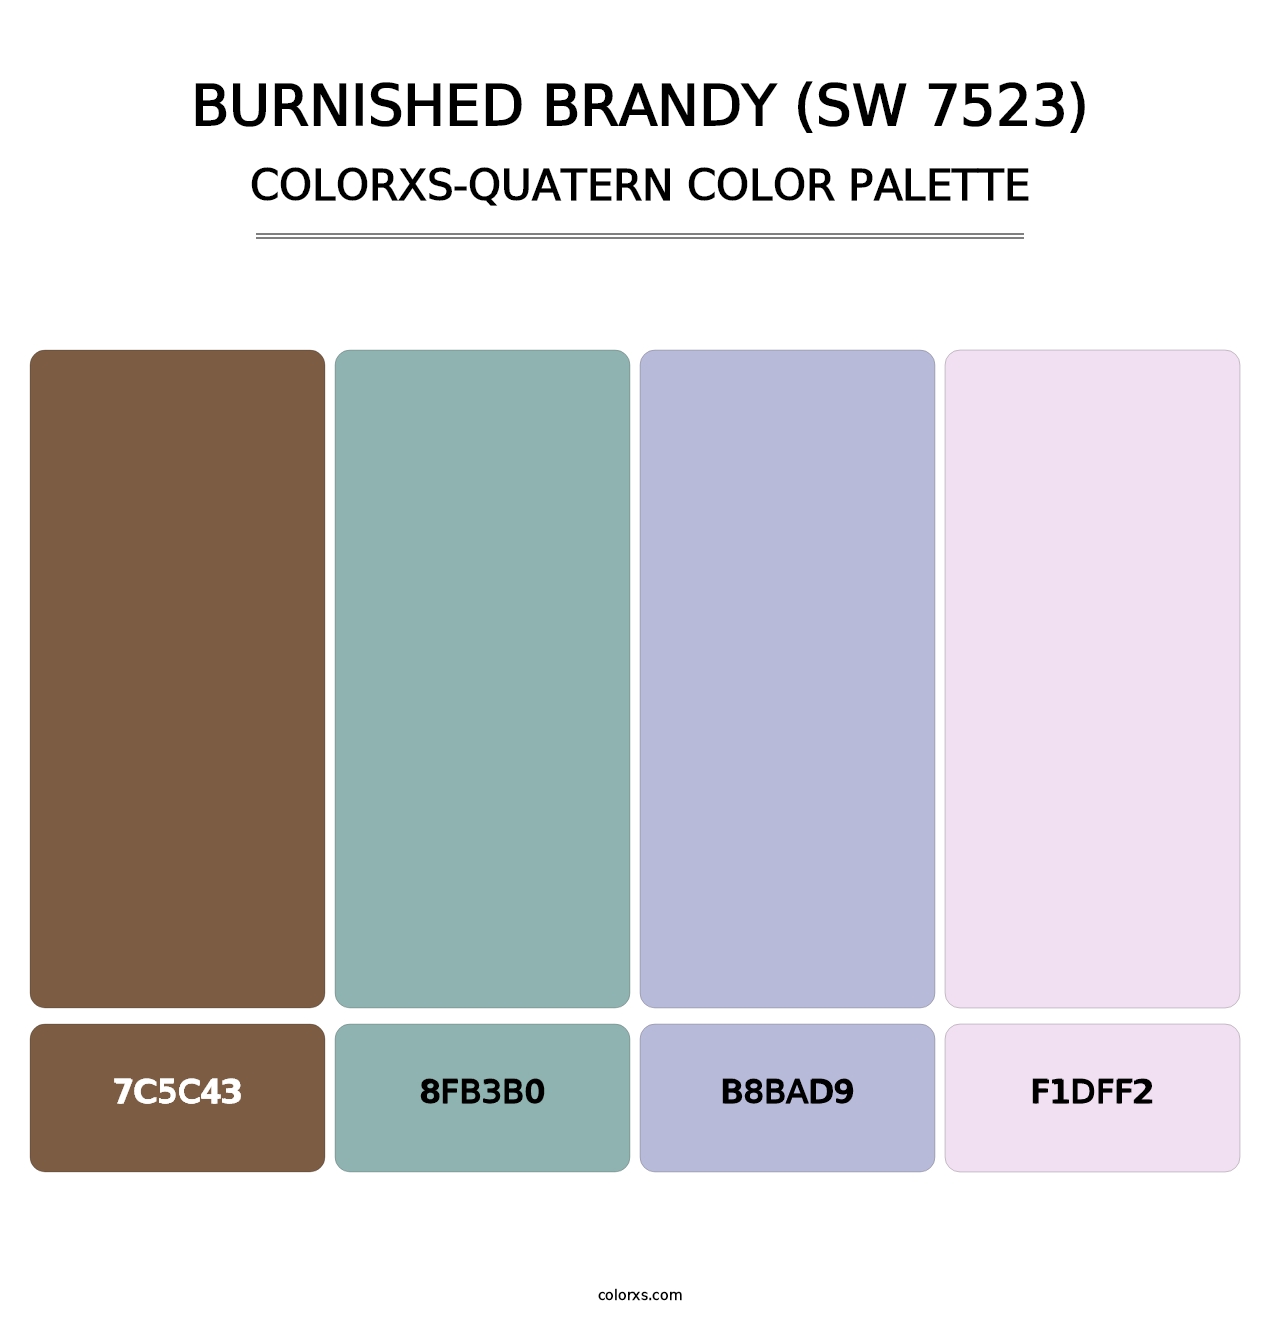 Burnished Brandy (SW 7523) - Colorxs Quatern Palette